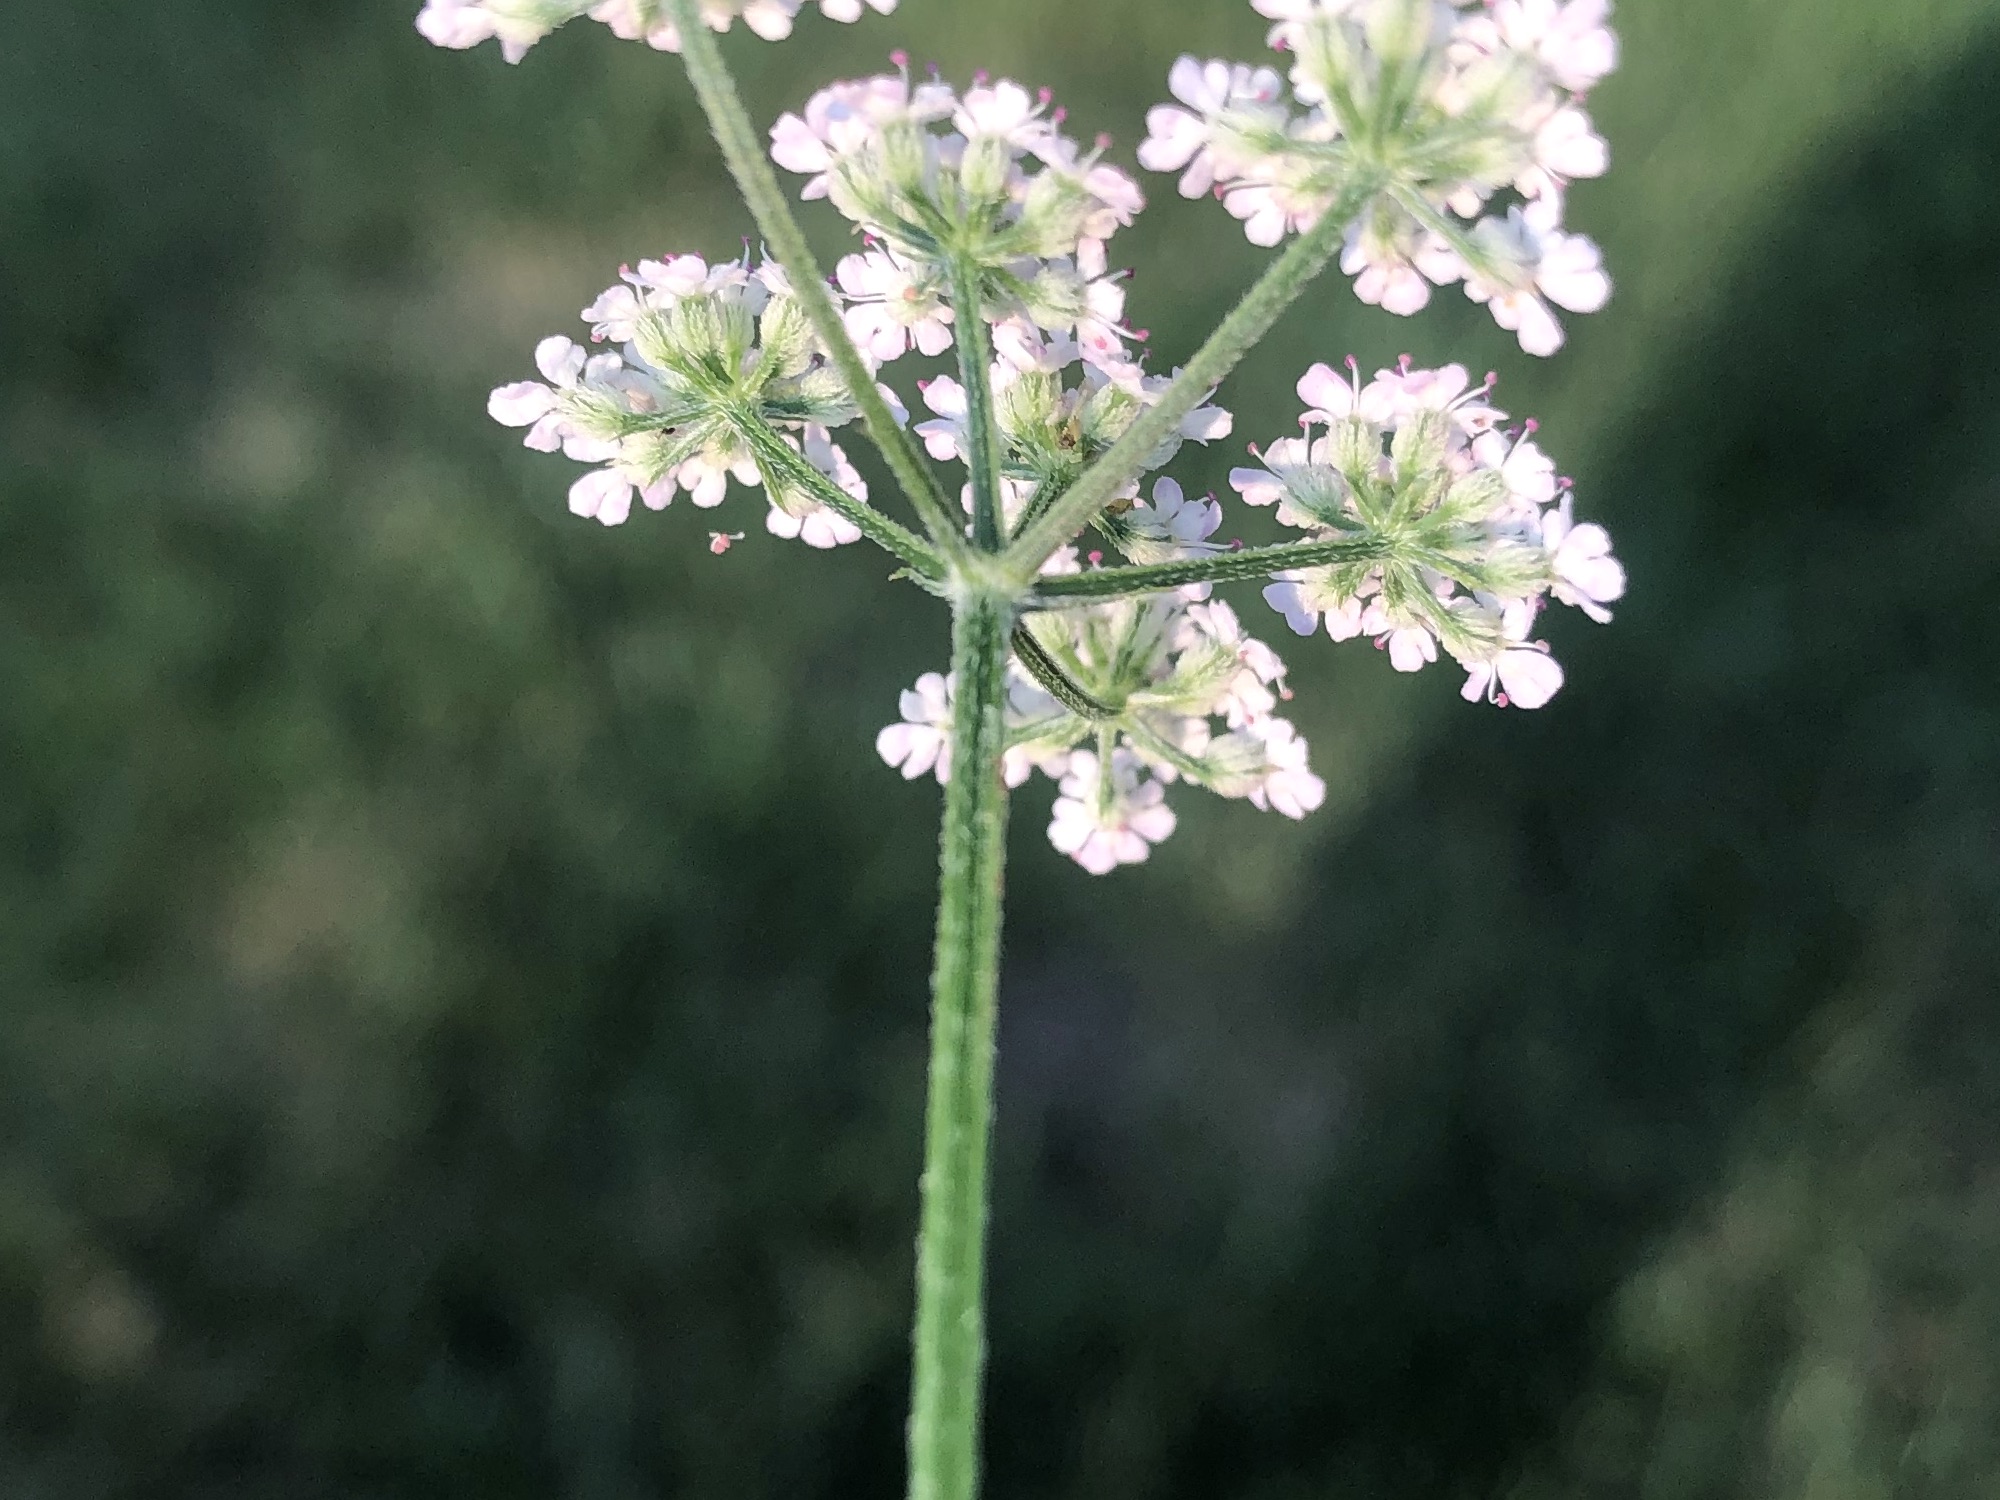 Hedge Parsley in Madison, Wisconsin on July 20, 2022.